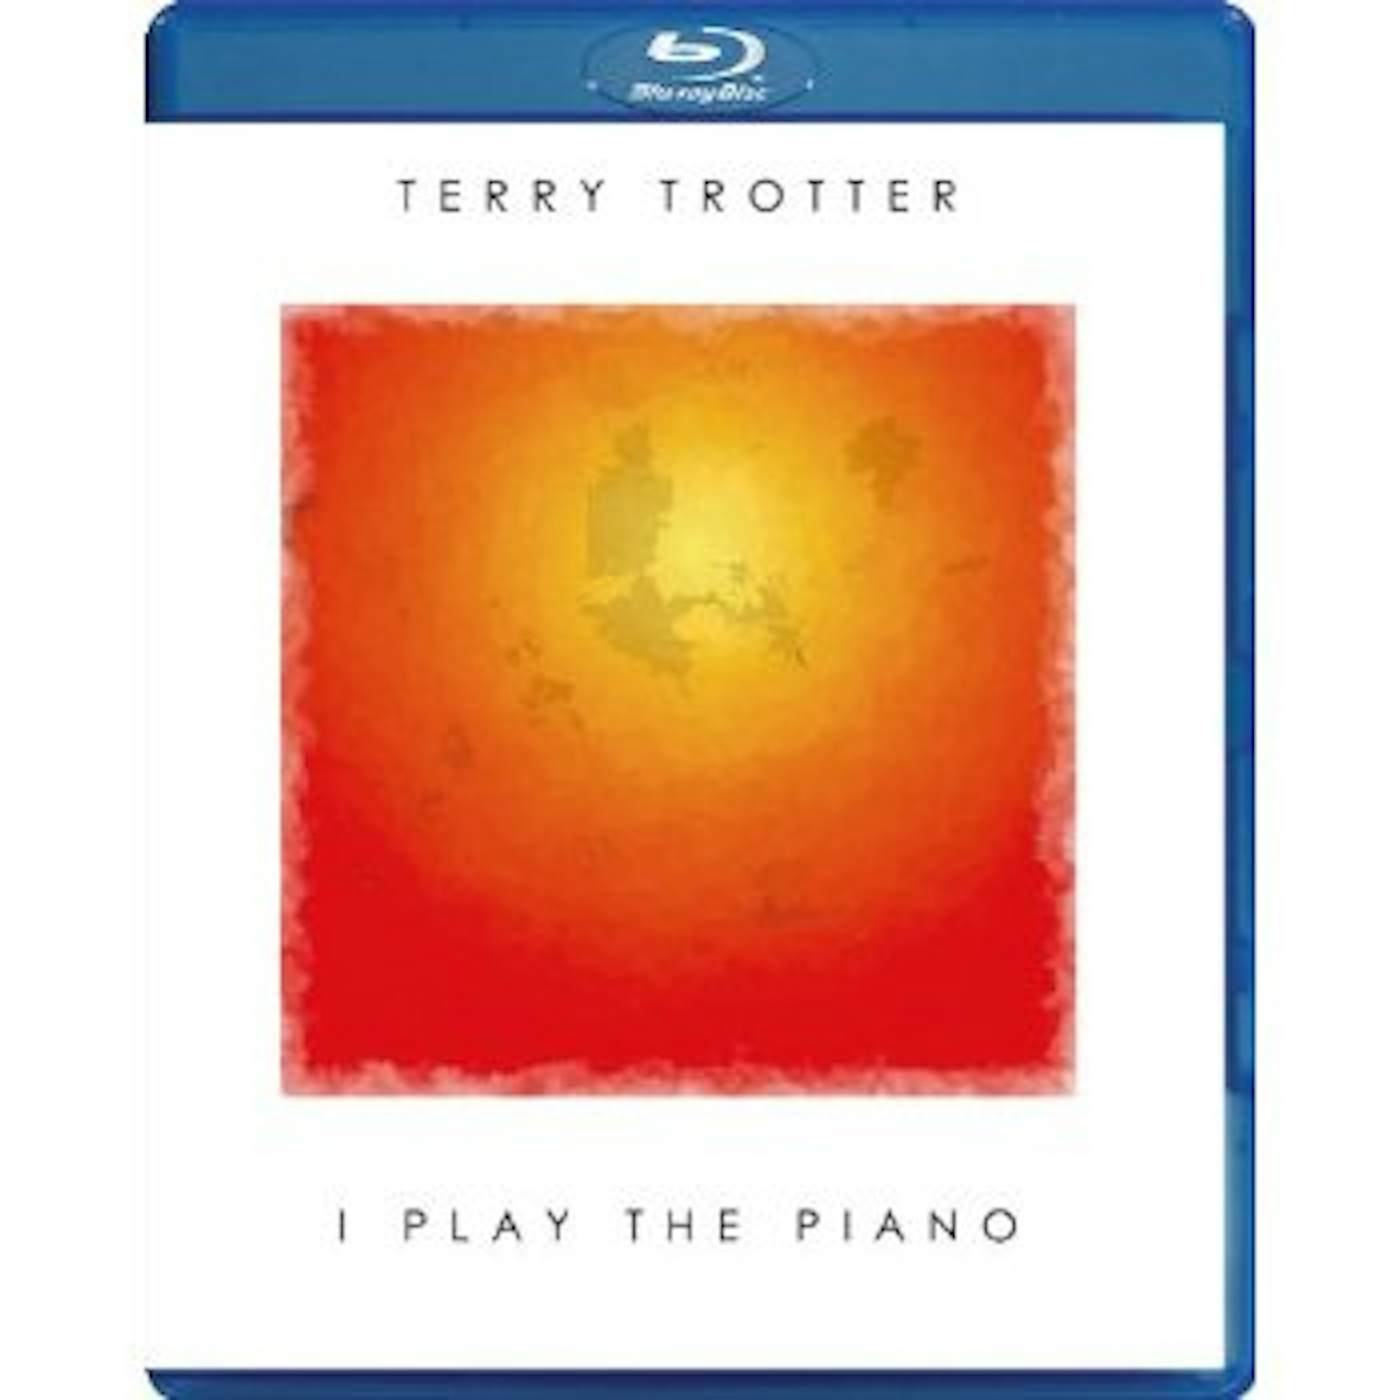 Terry Trotter PLAY THE PIANO Blu-ray